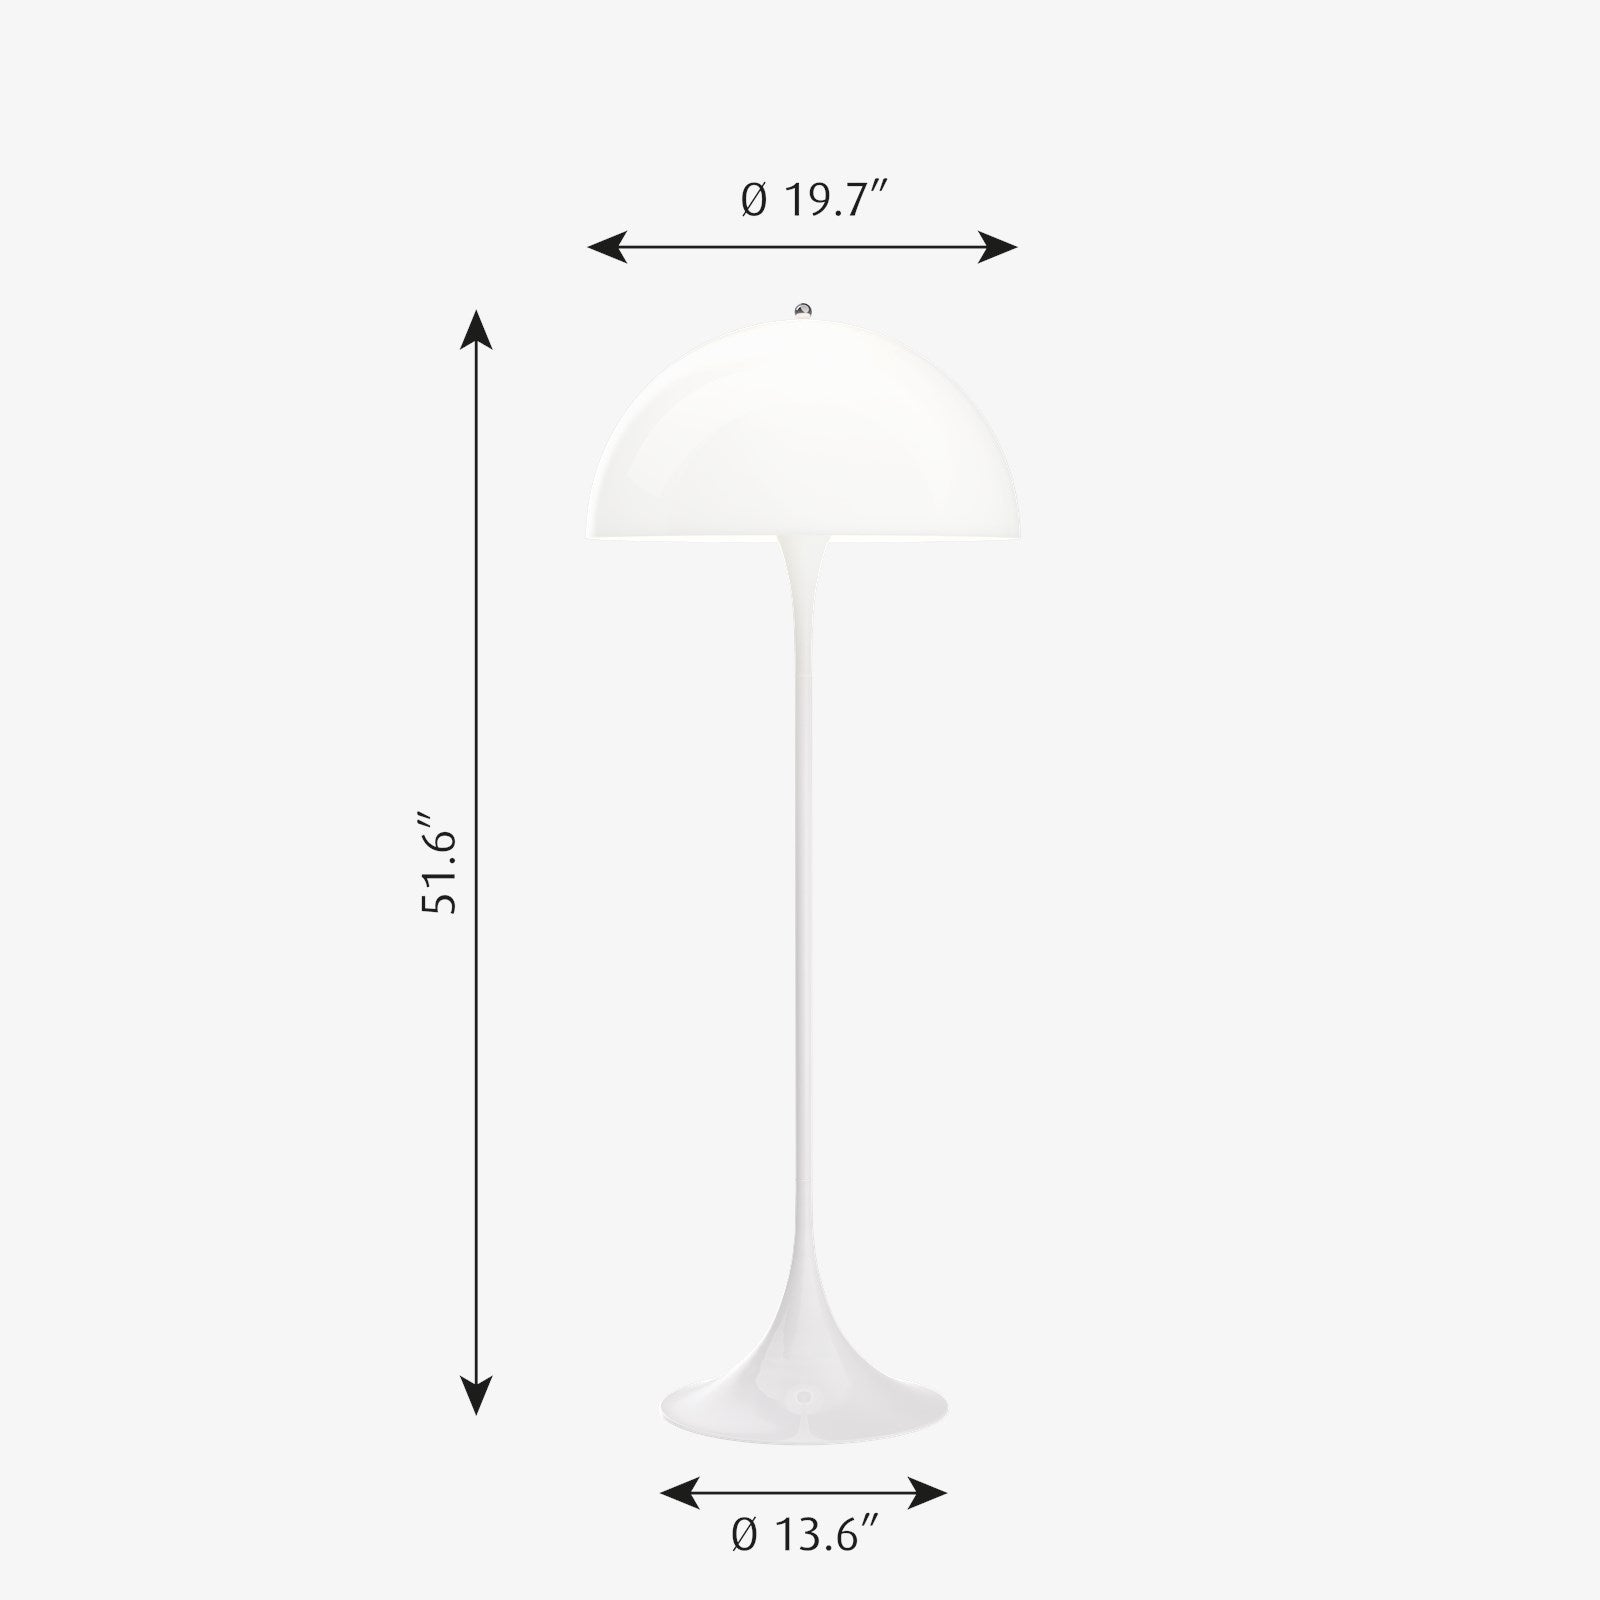 The Pantella Floor Lamp by Louis Poulsen emits a soft and comfortable illumination. The hemispherical shade reflects the light downwards, and the material used ensures that the majority of the light is spread diffusely in the room from the surface of the shade.